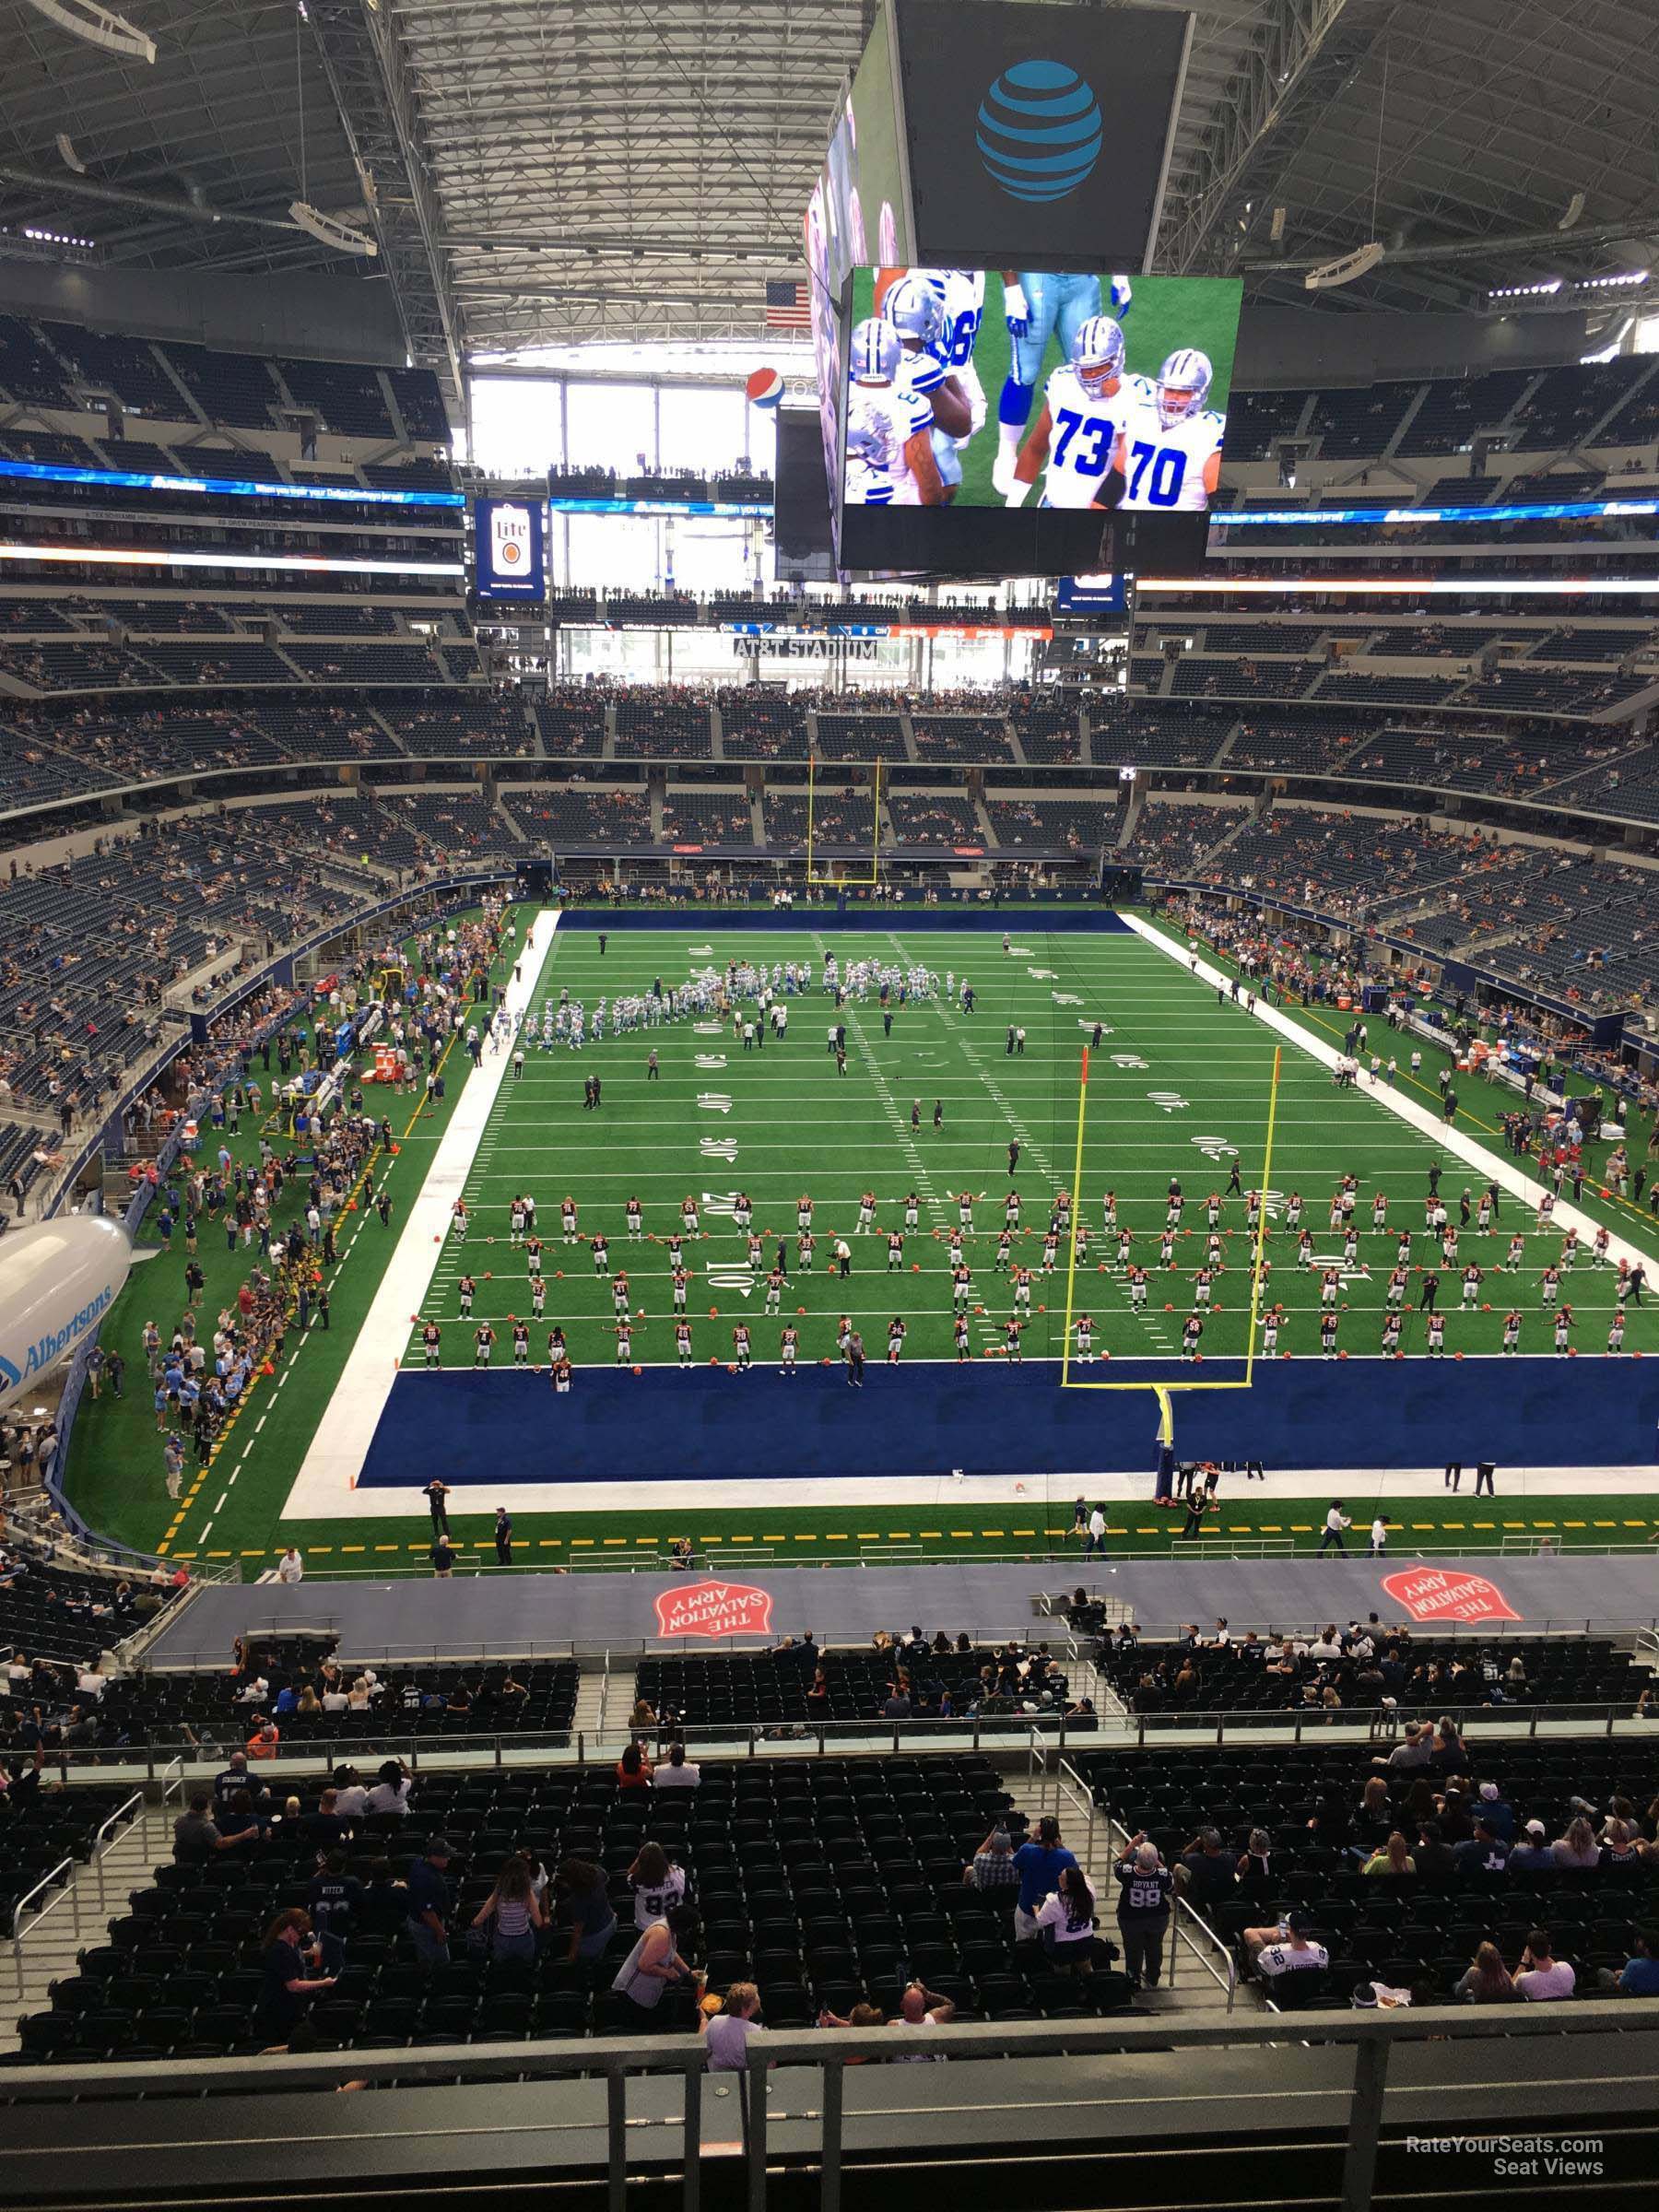 section 349, row 3 seat view  for football - at&t stadium (cowboys stadium)